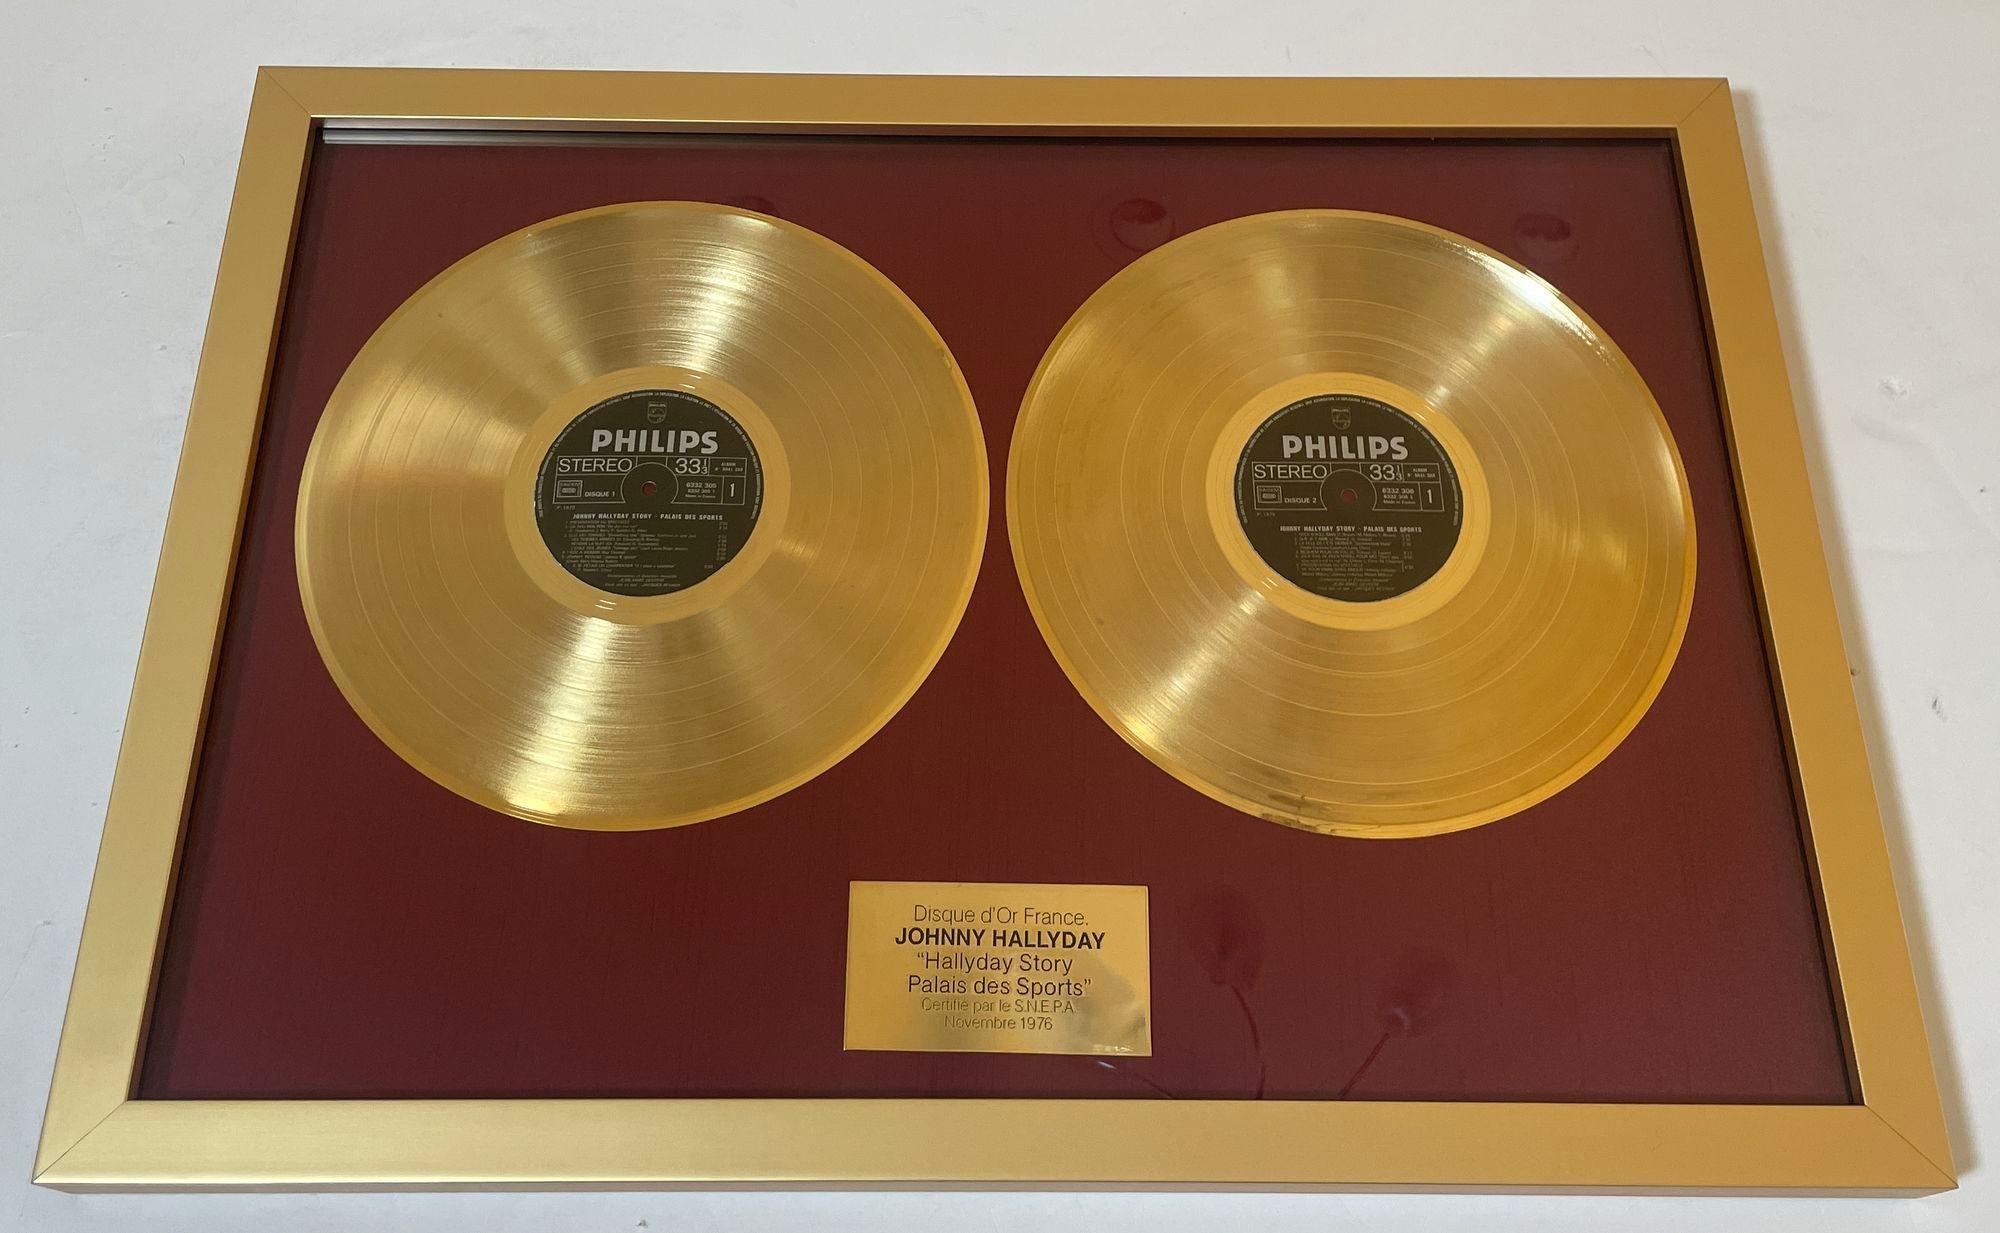 Official Gold Record Award France Johnny Halliday Story Palais des Sports 1976 For Sale 1